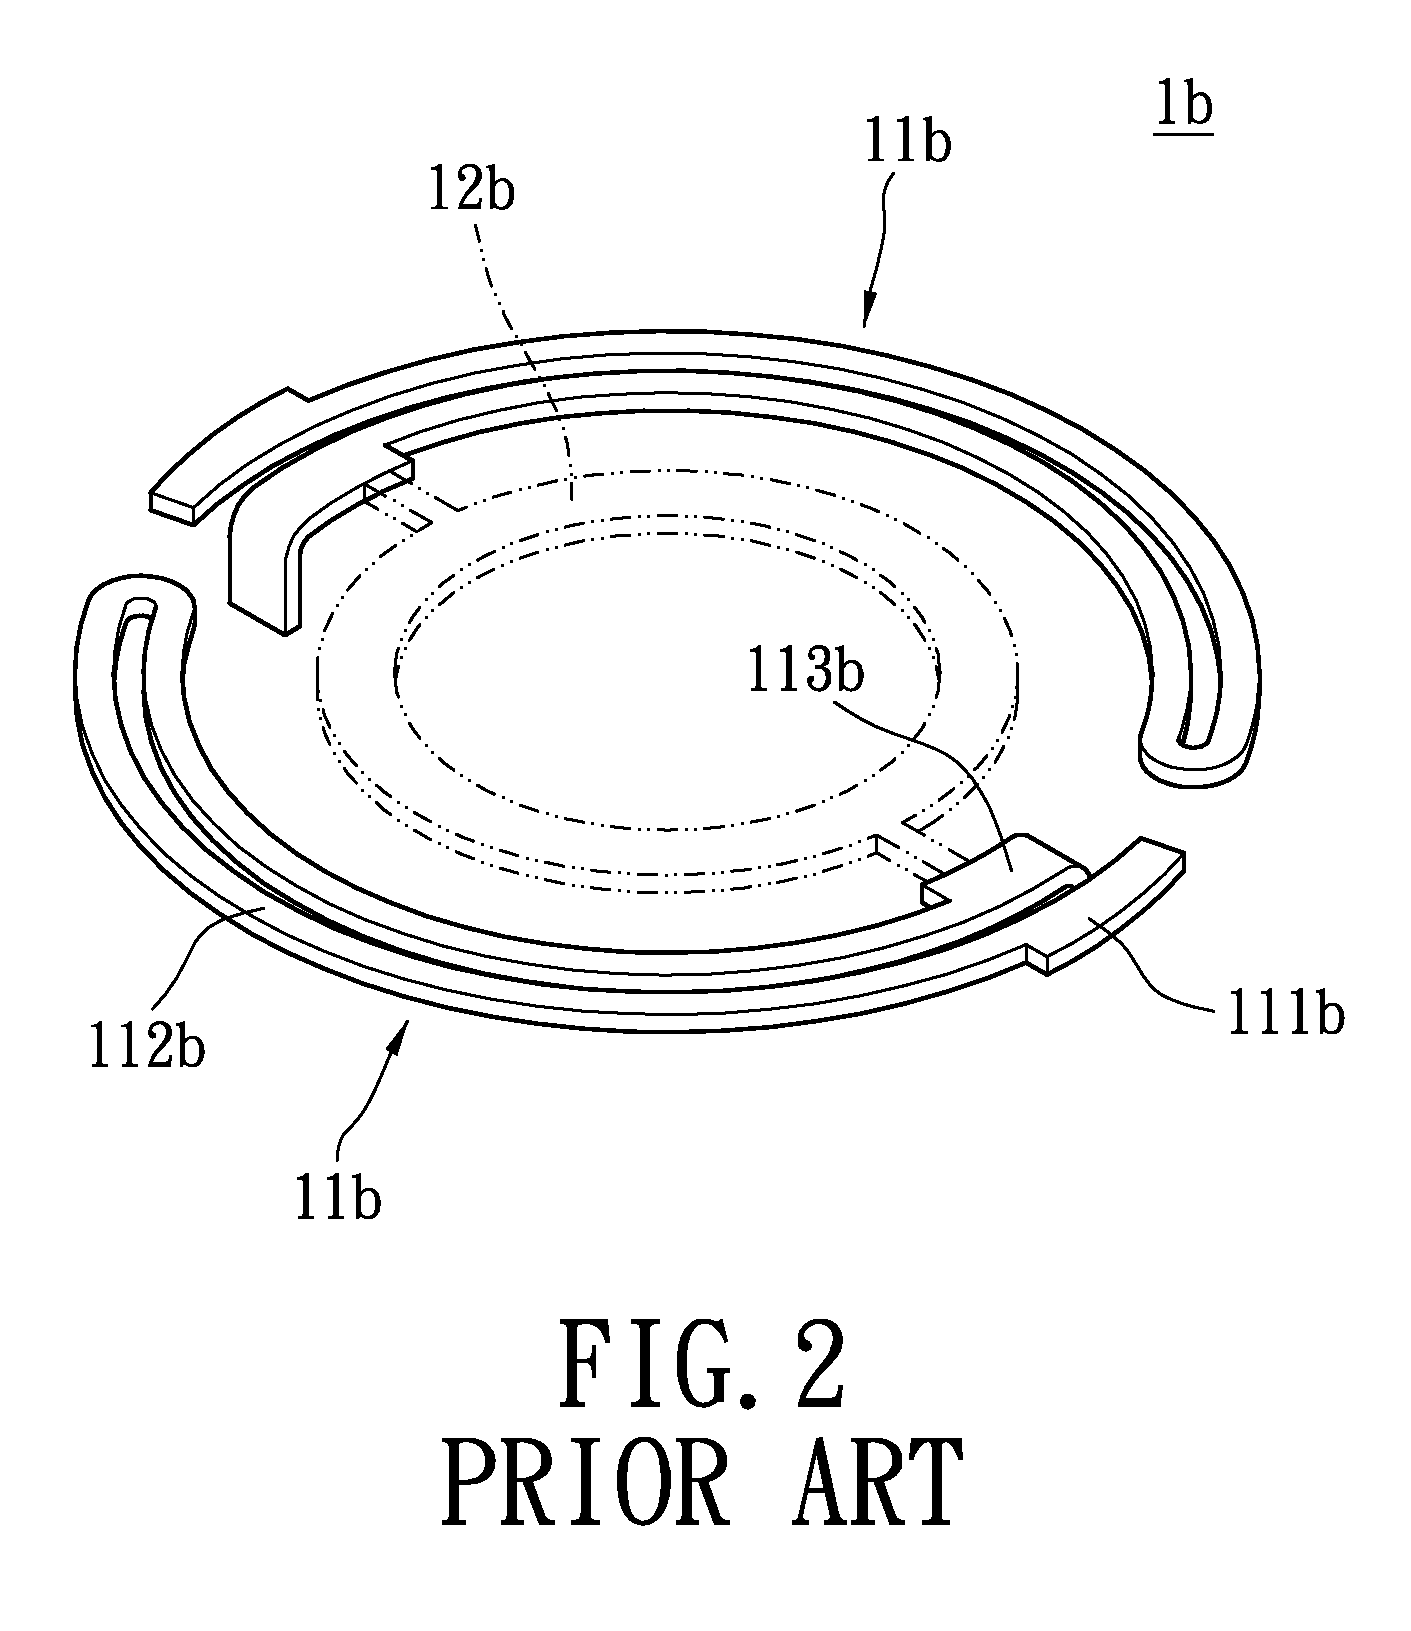 Lens activating device